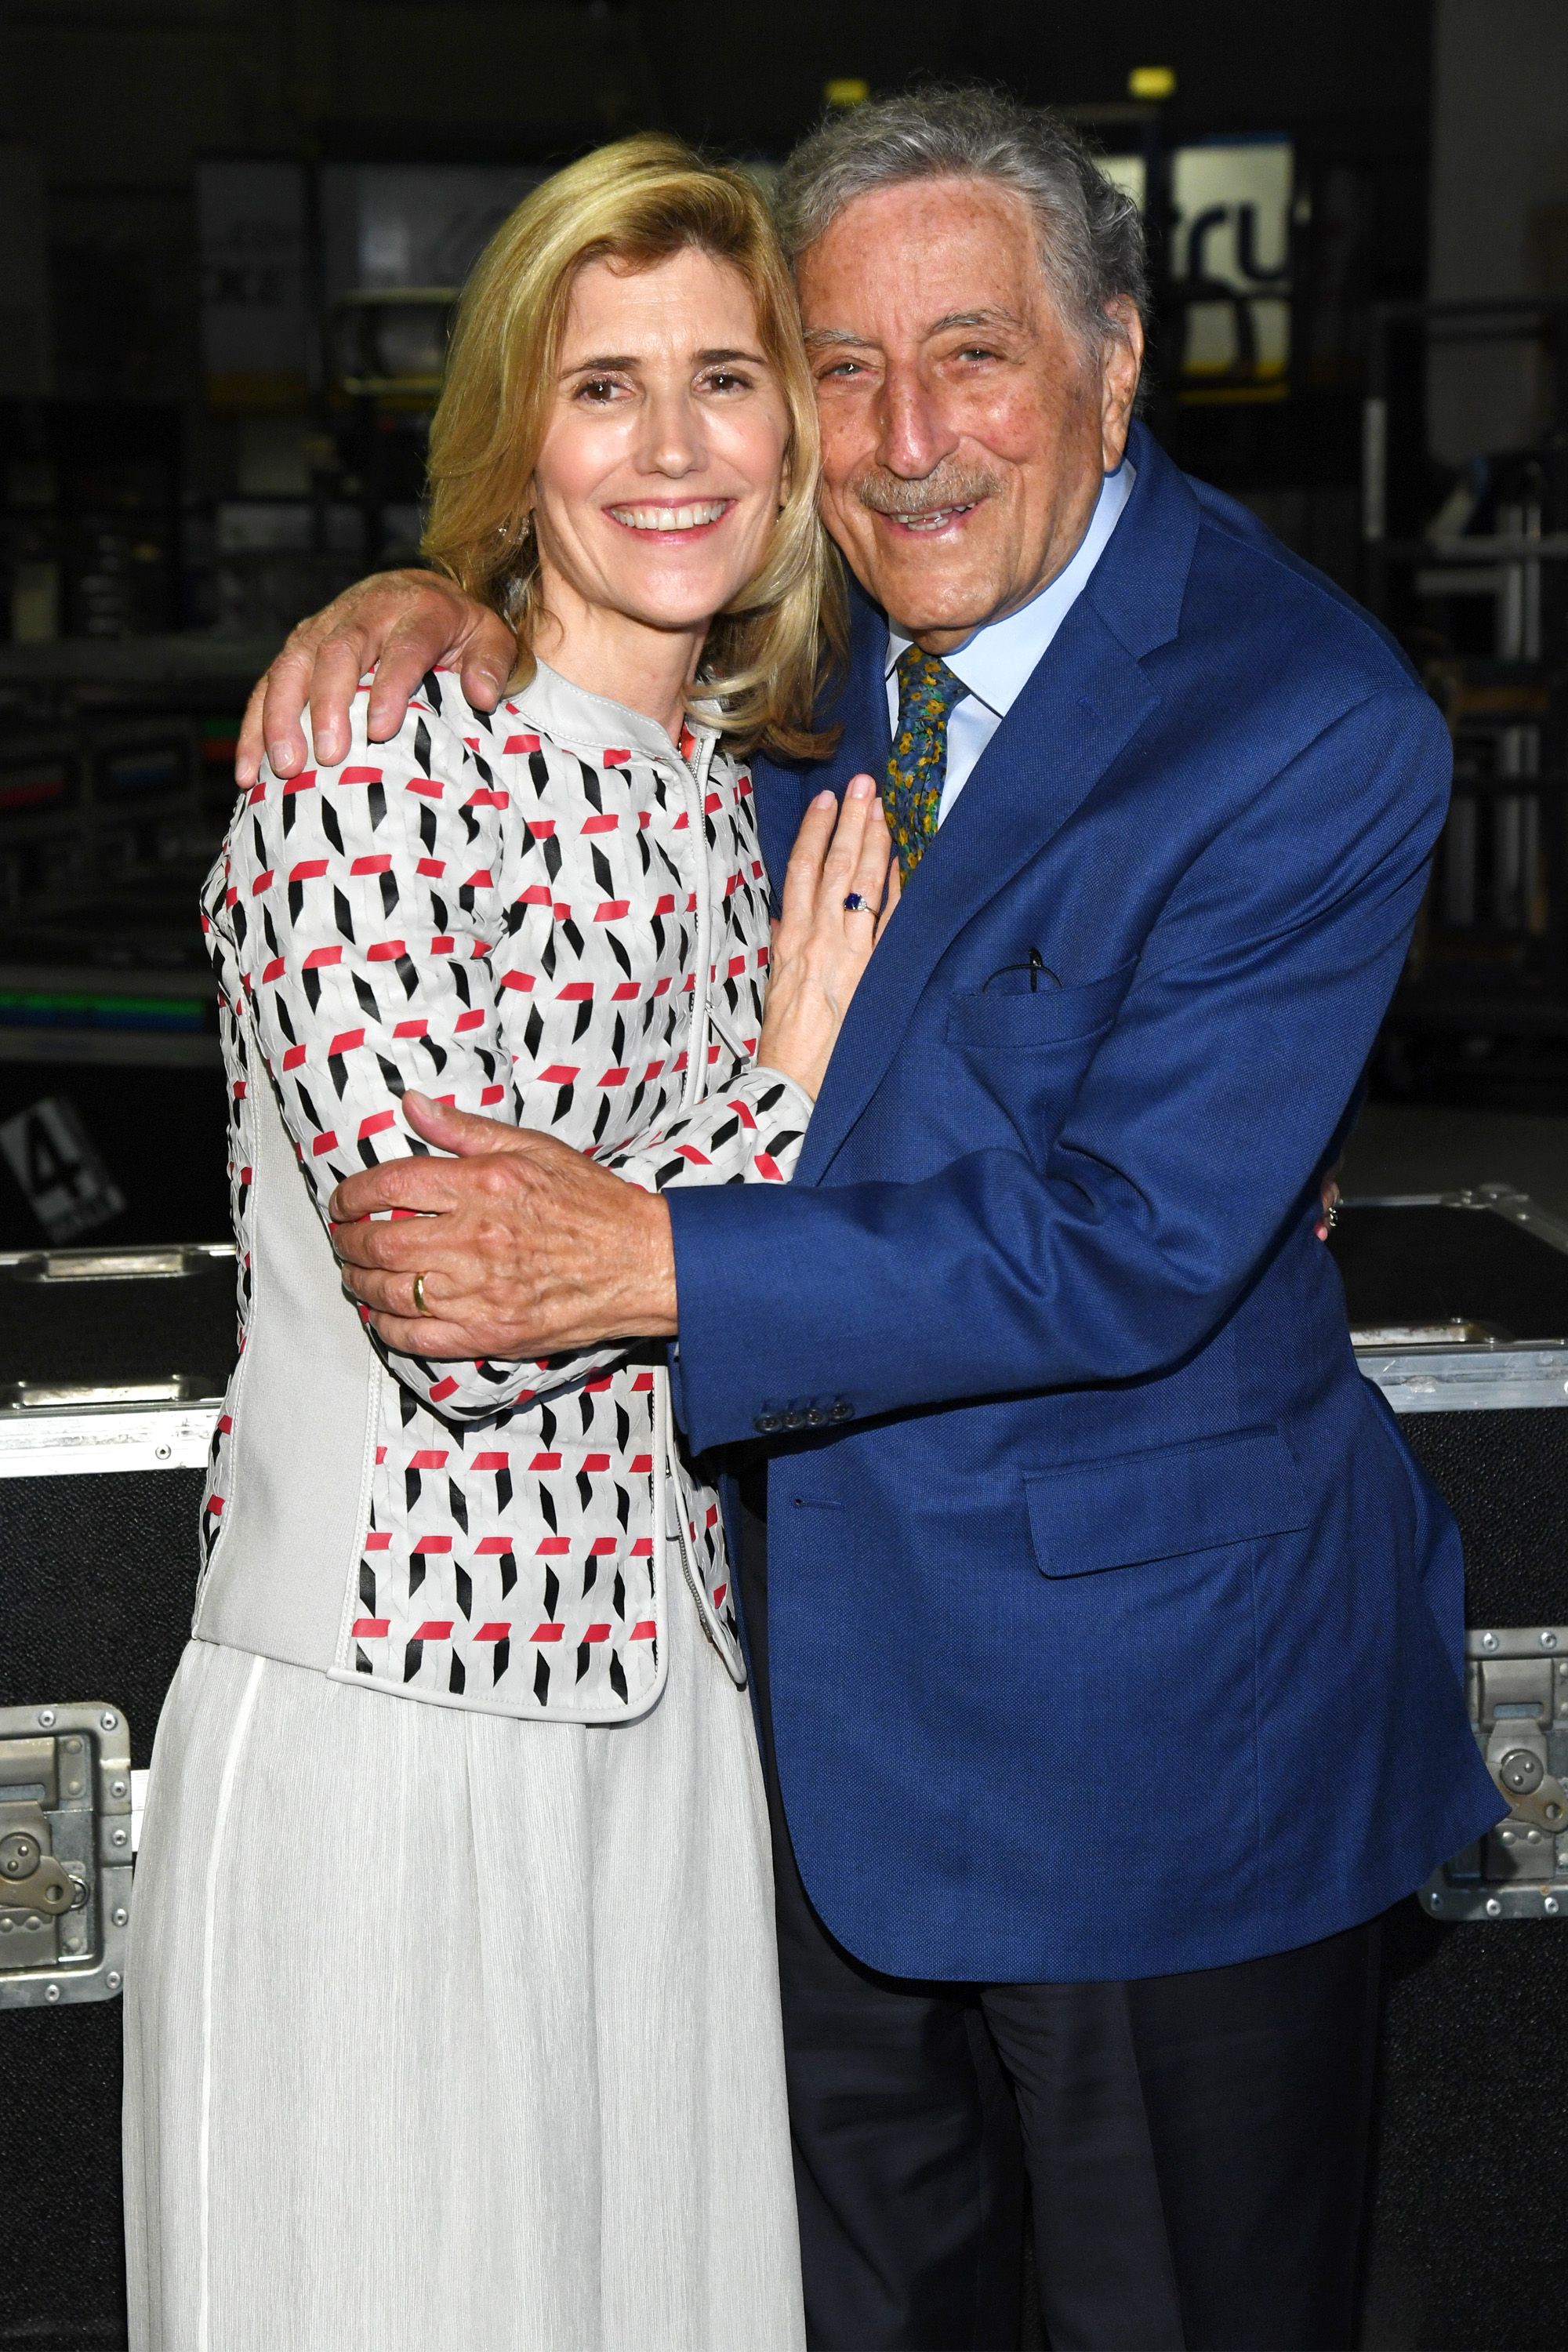 Tony Bennett and Susan Benedetto Celebrate 20th Anniversary of Exploring the Arts at Billy Joel at Madison Square Garden on April 12, 2019 in New York City. | Photo: Getty Images